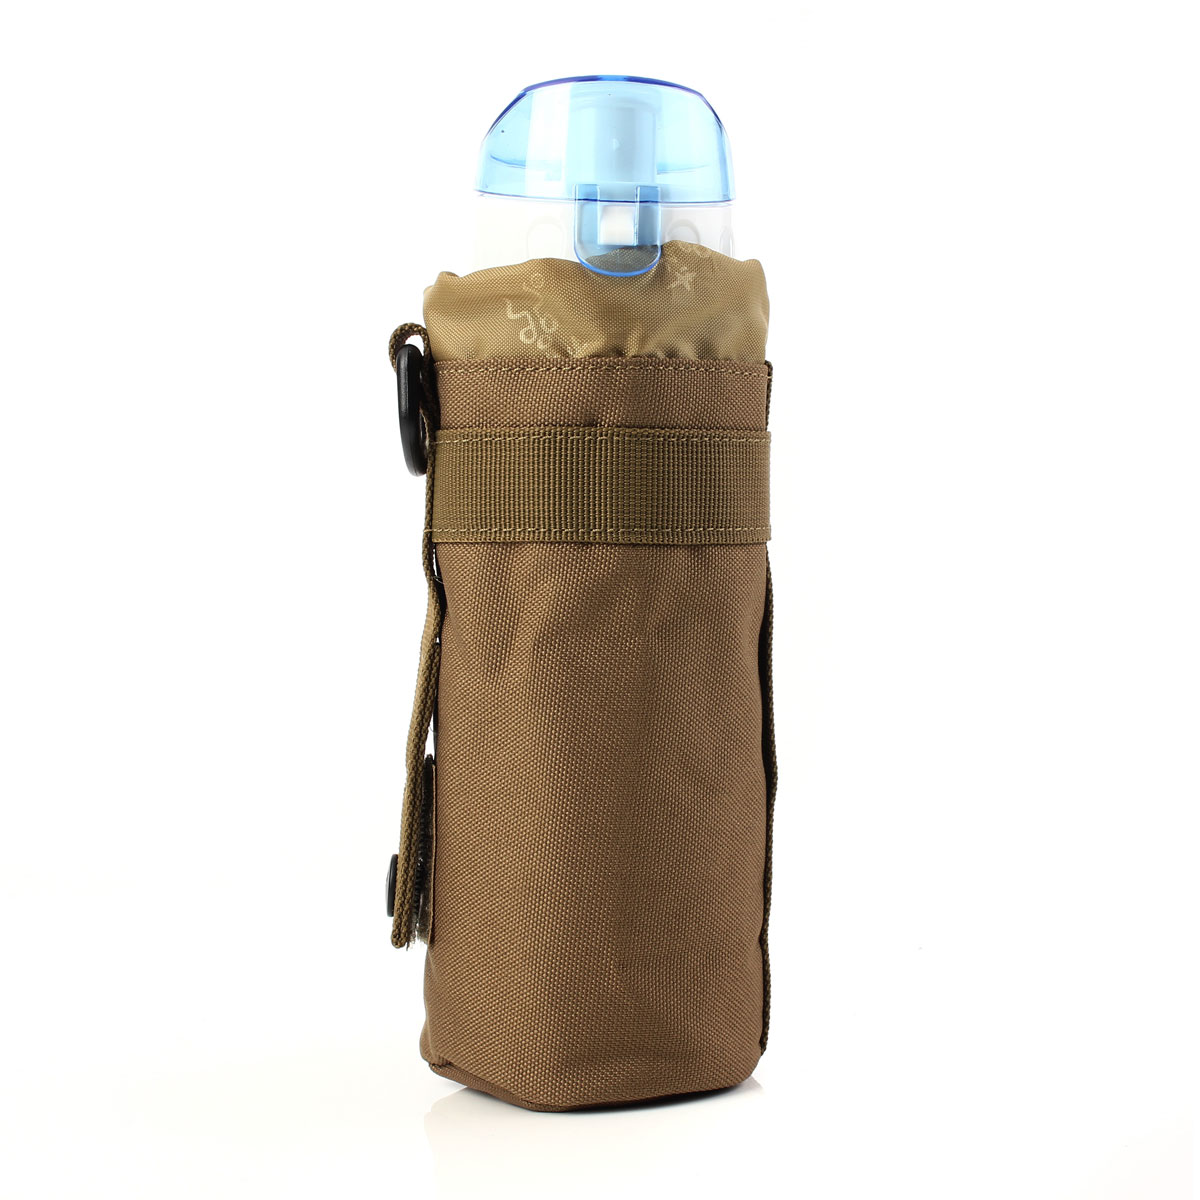 Tactical Military System Water Bottle Bag Kettle Pouch Holder Bag Outdoor KFBDU 